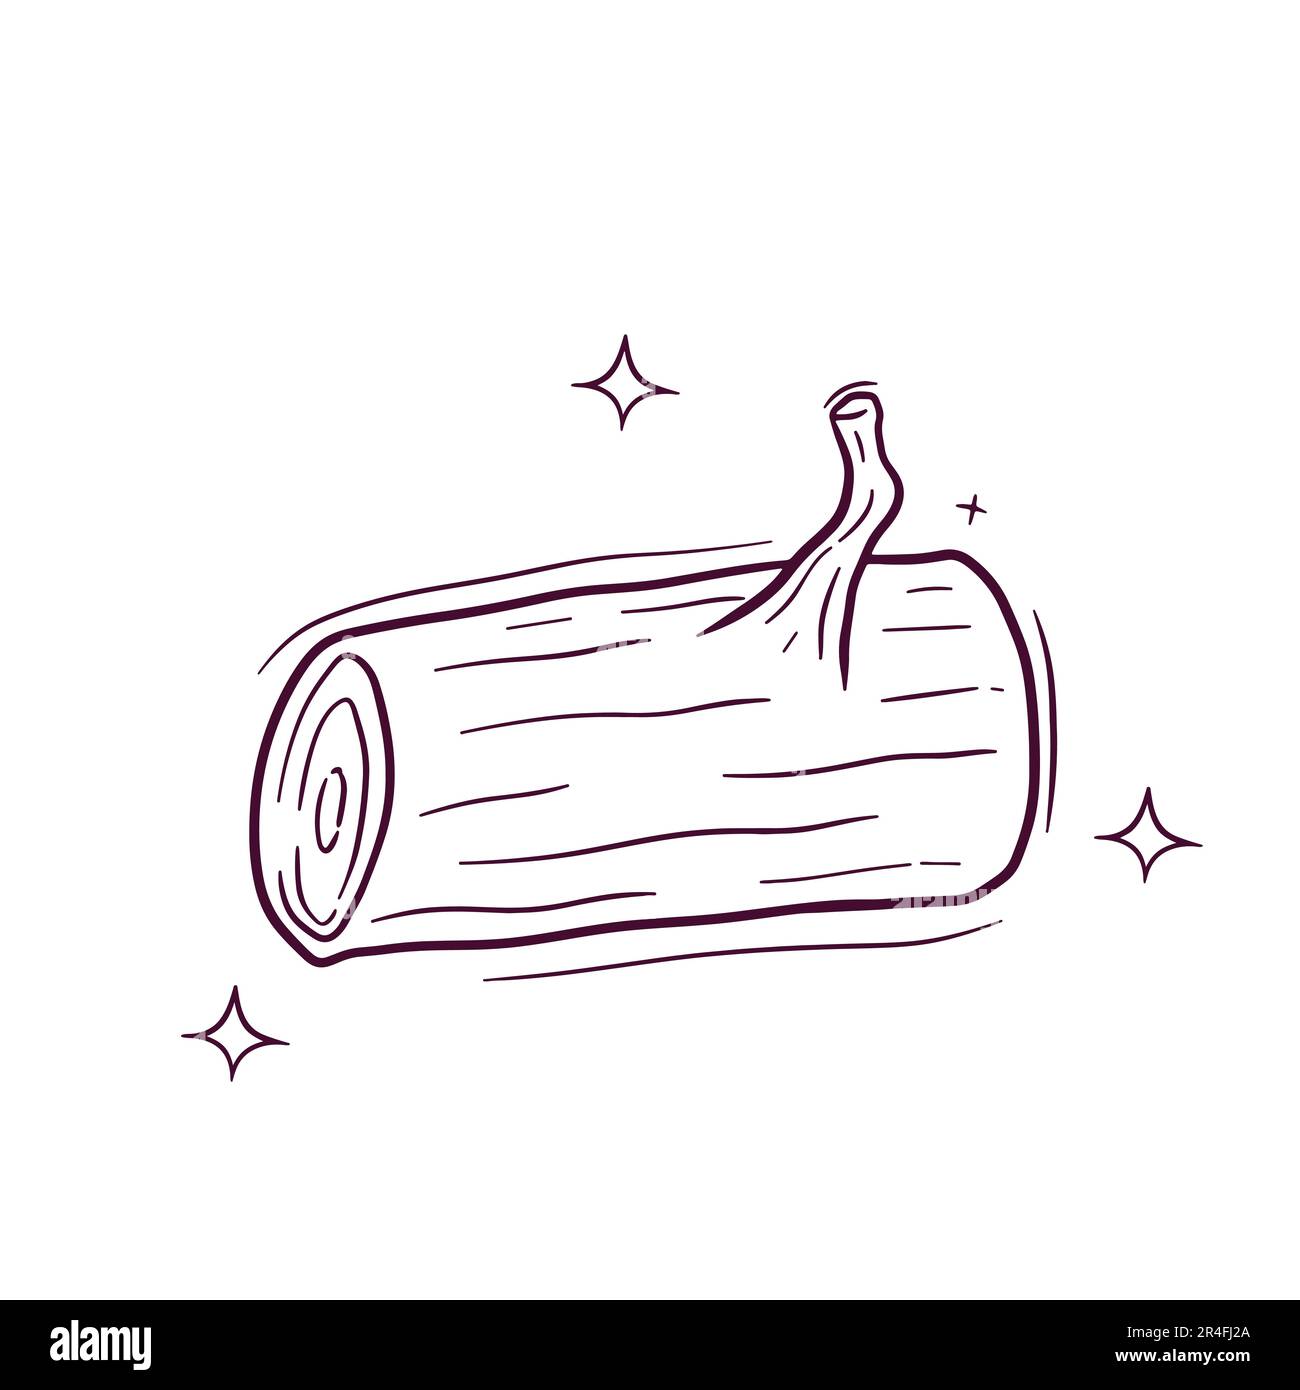 Hand Drawn Wood Logs. Doodle Vector Sketch Illustration Stock Vector